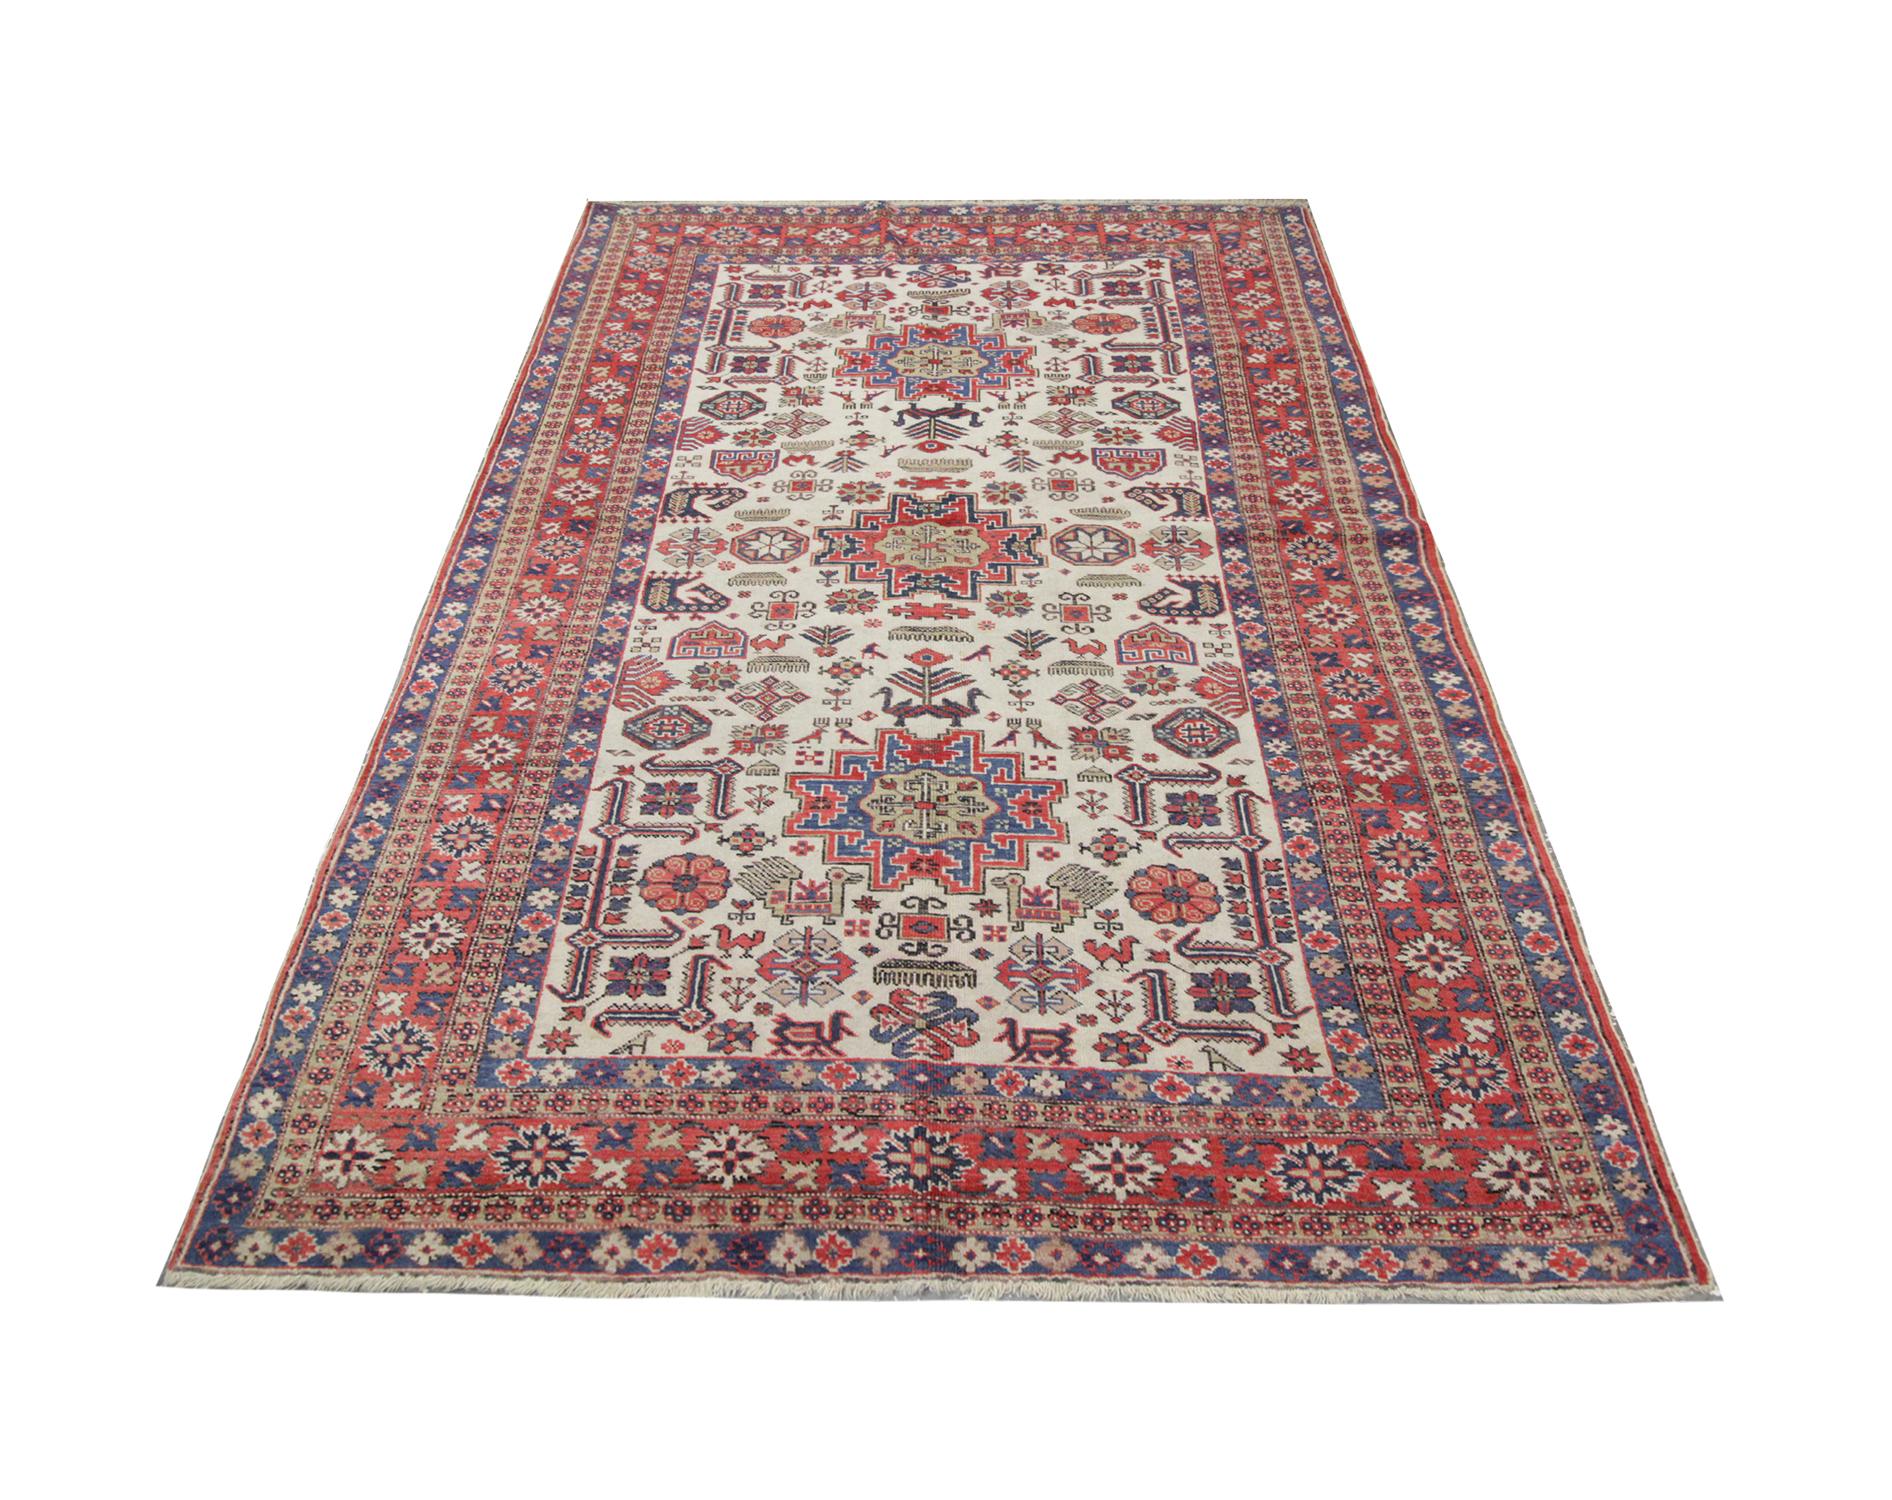 Bright colors have been used to construct this large, vintage area rug. Blues and reds have been woven intricately with a multi-layered floral and geometric border which encompasses the central design. The centre features three beautiful geometric